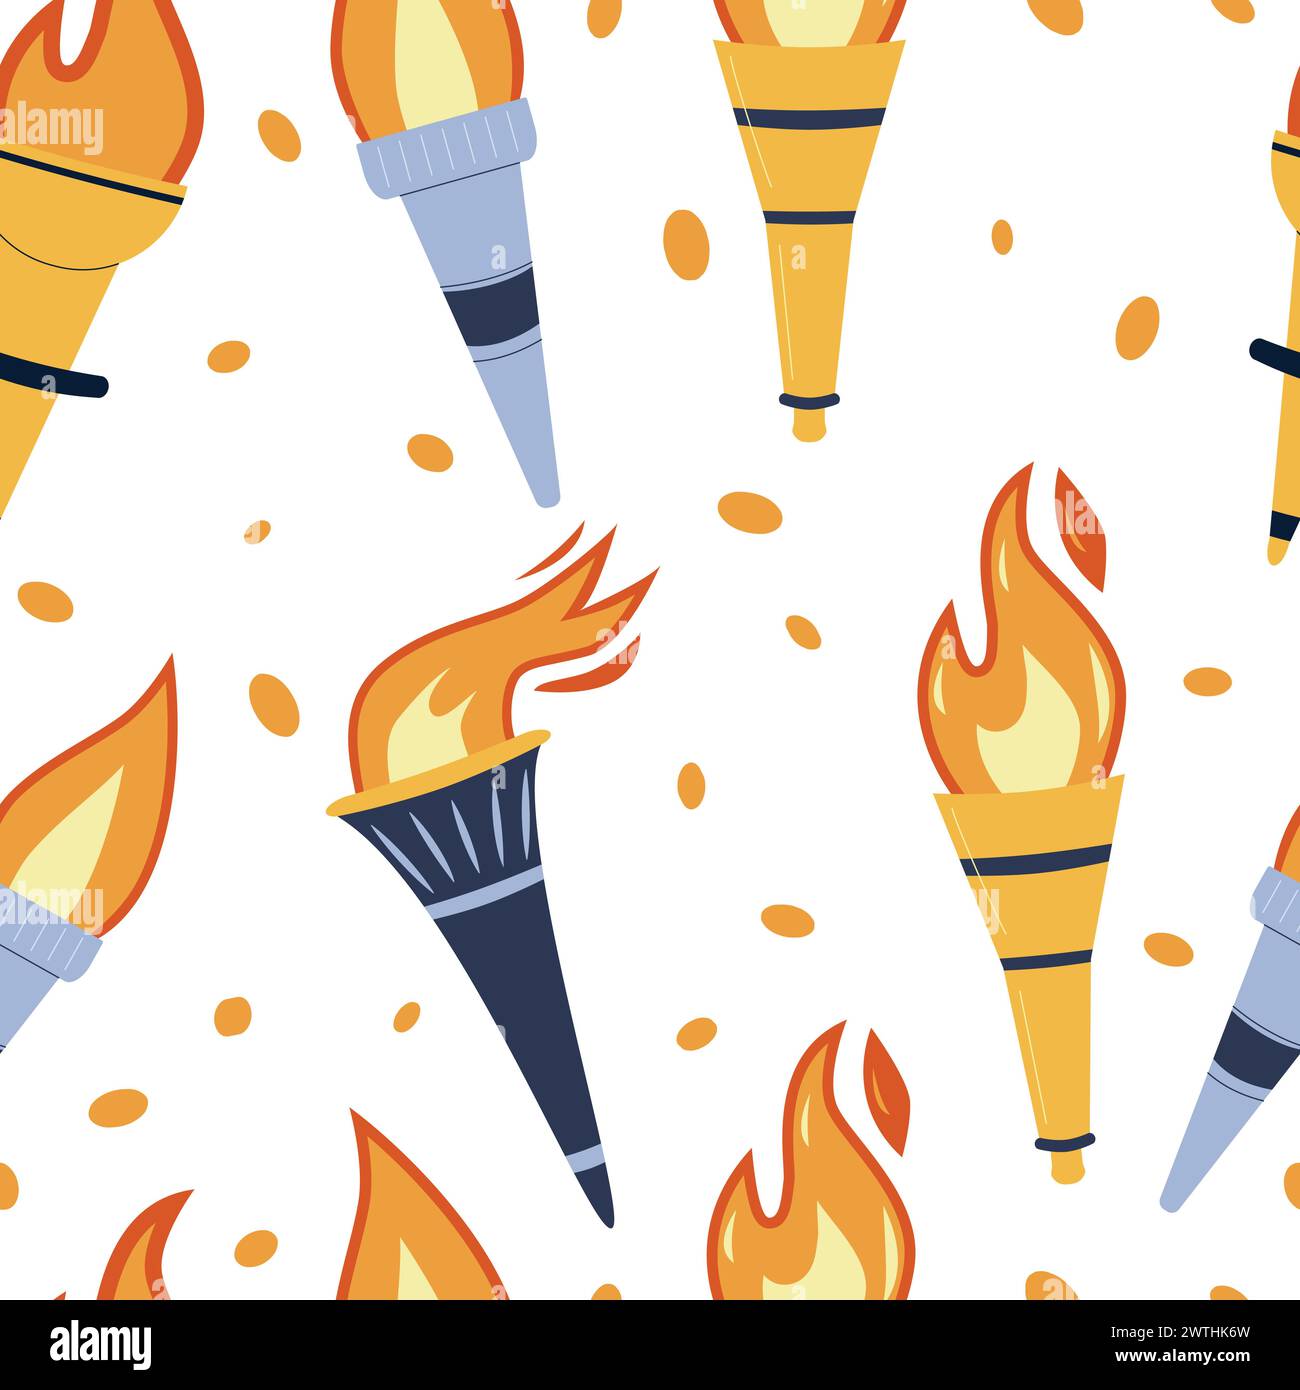 Torches with burning flame seamless pattern. Symbol of sport, games, victory and champion competition endless background. Vector flat illustration rep Stock Vector